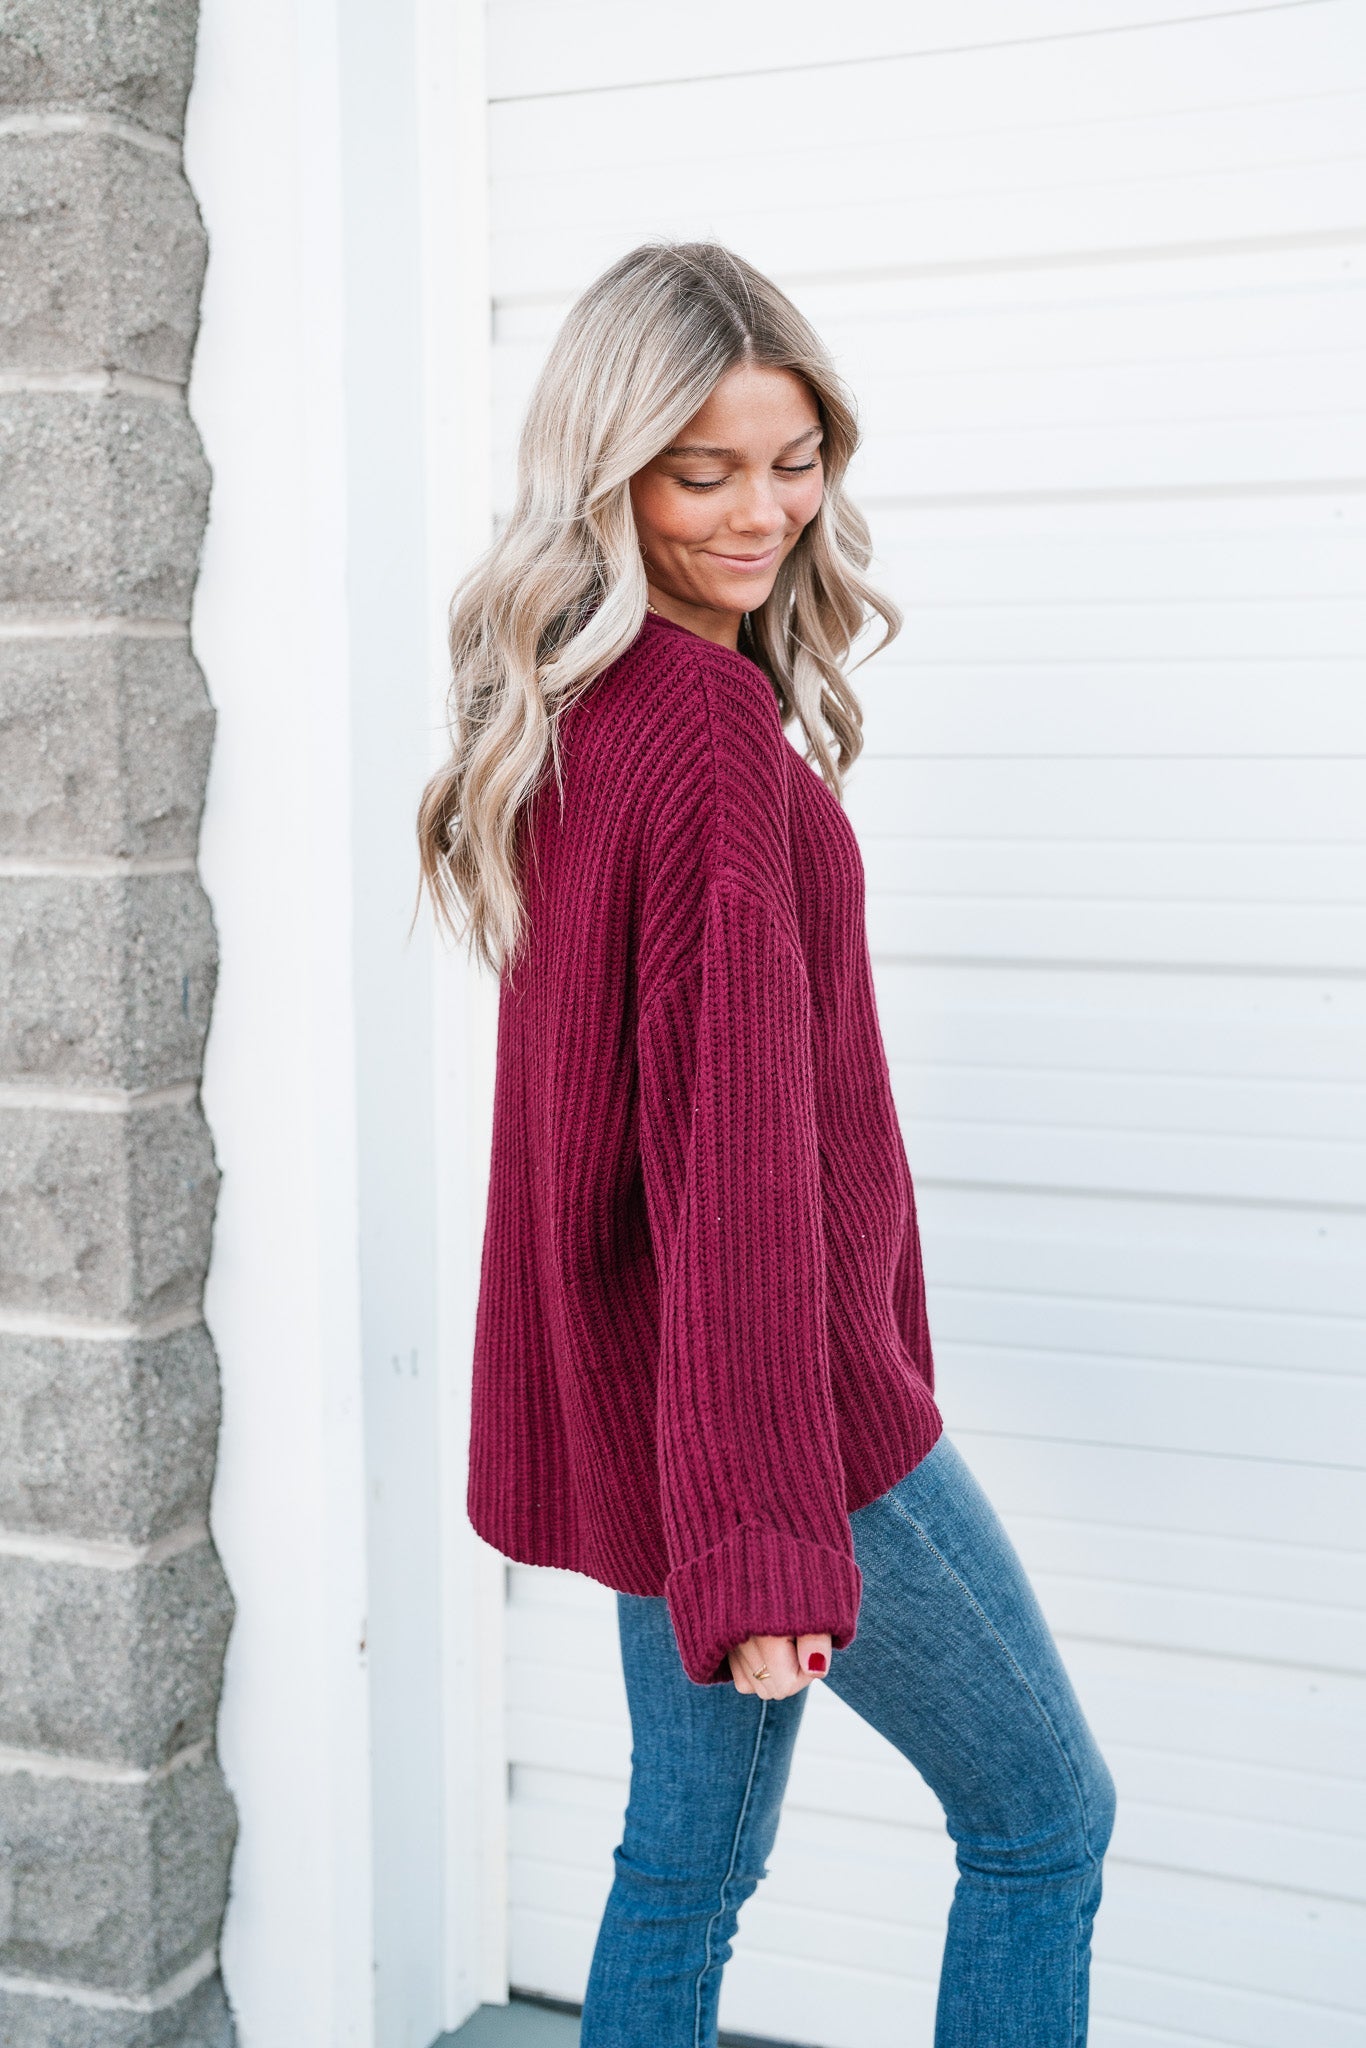 Be Happy Ribbed Knit Sweater